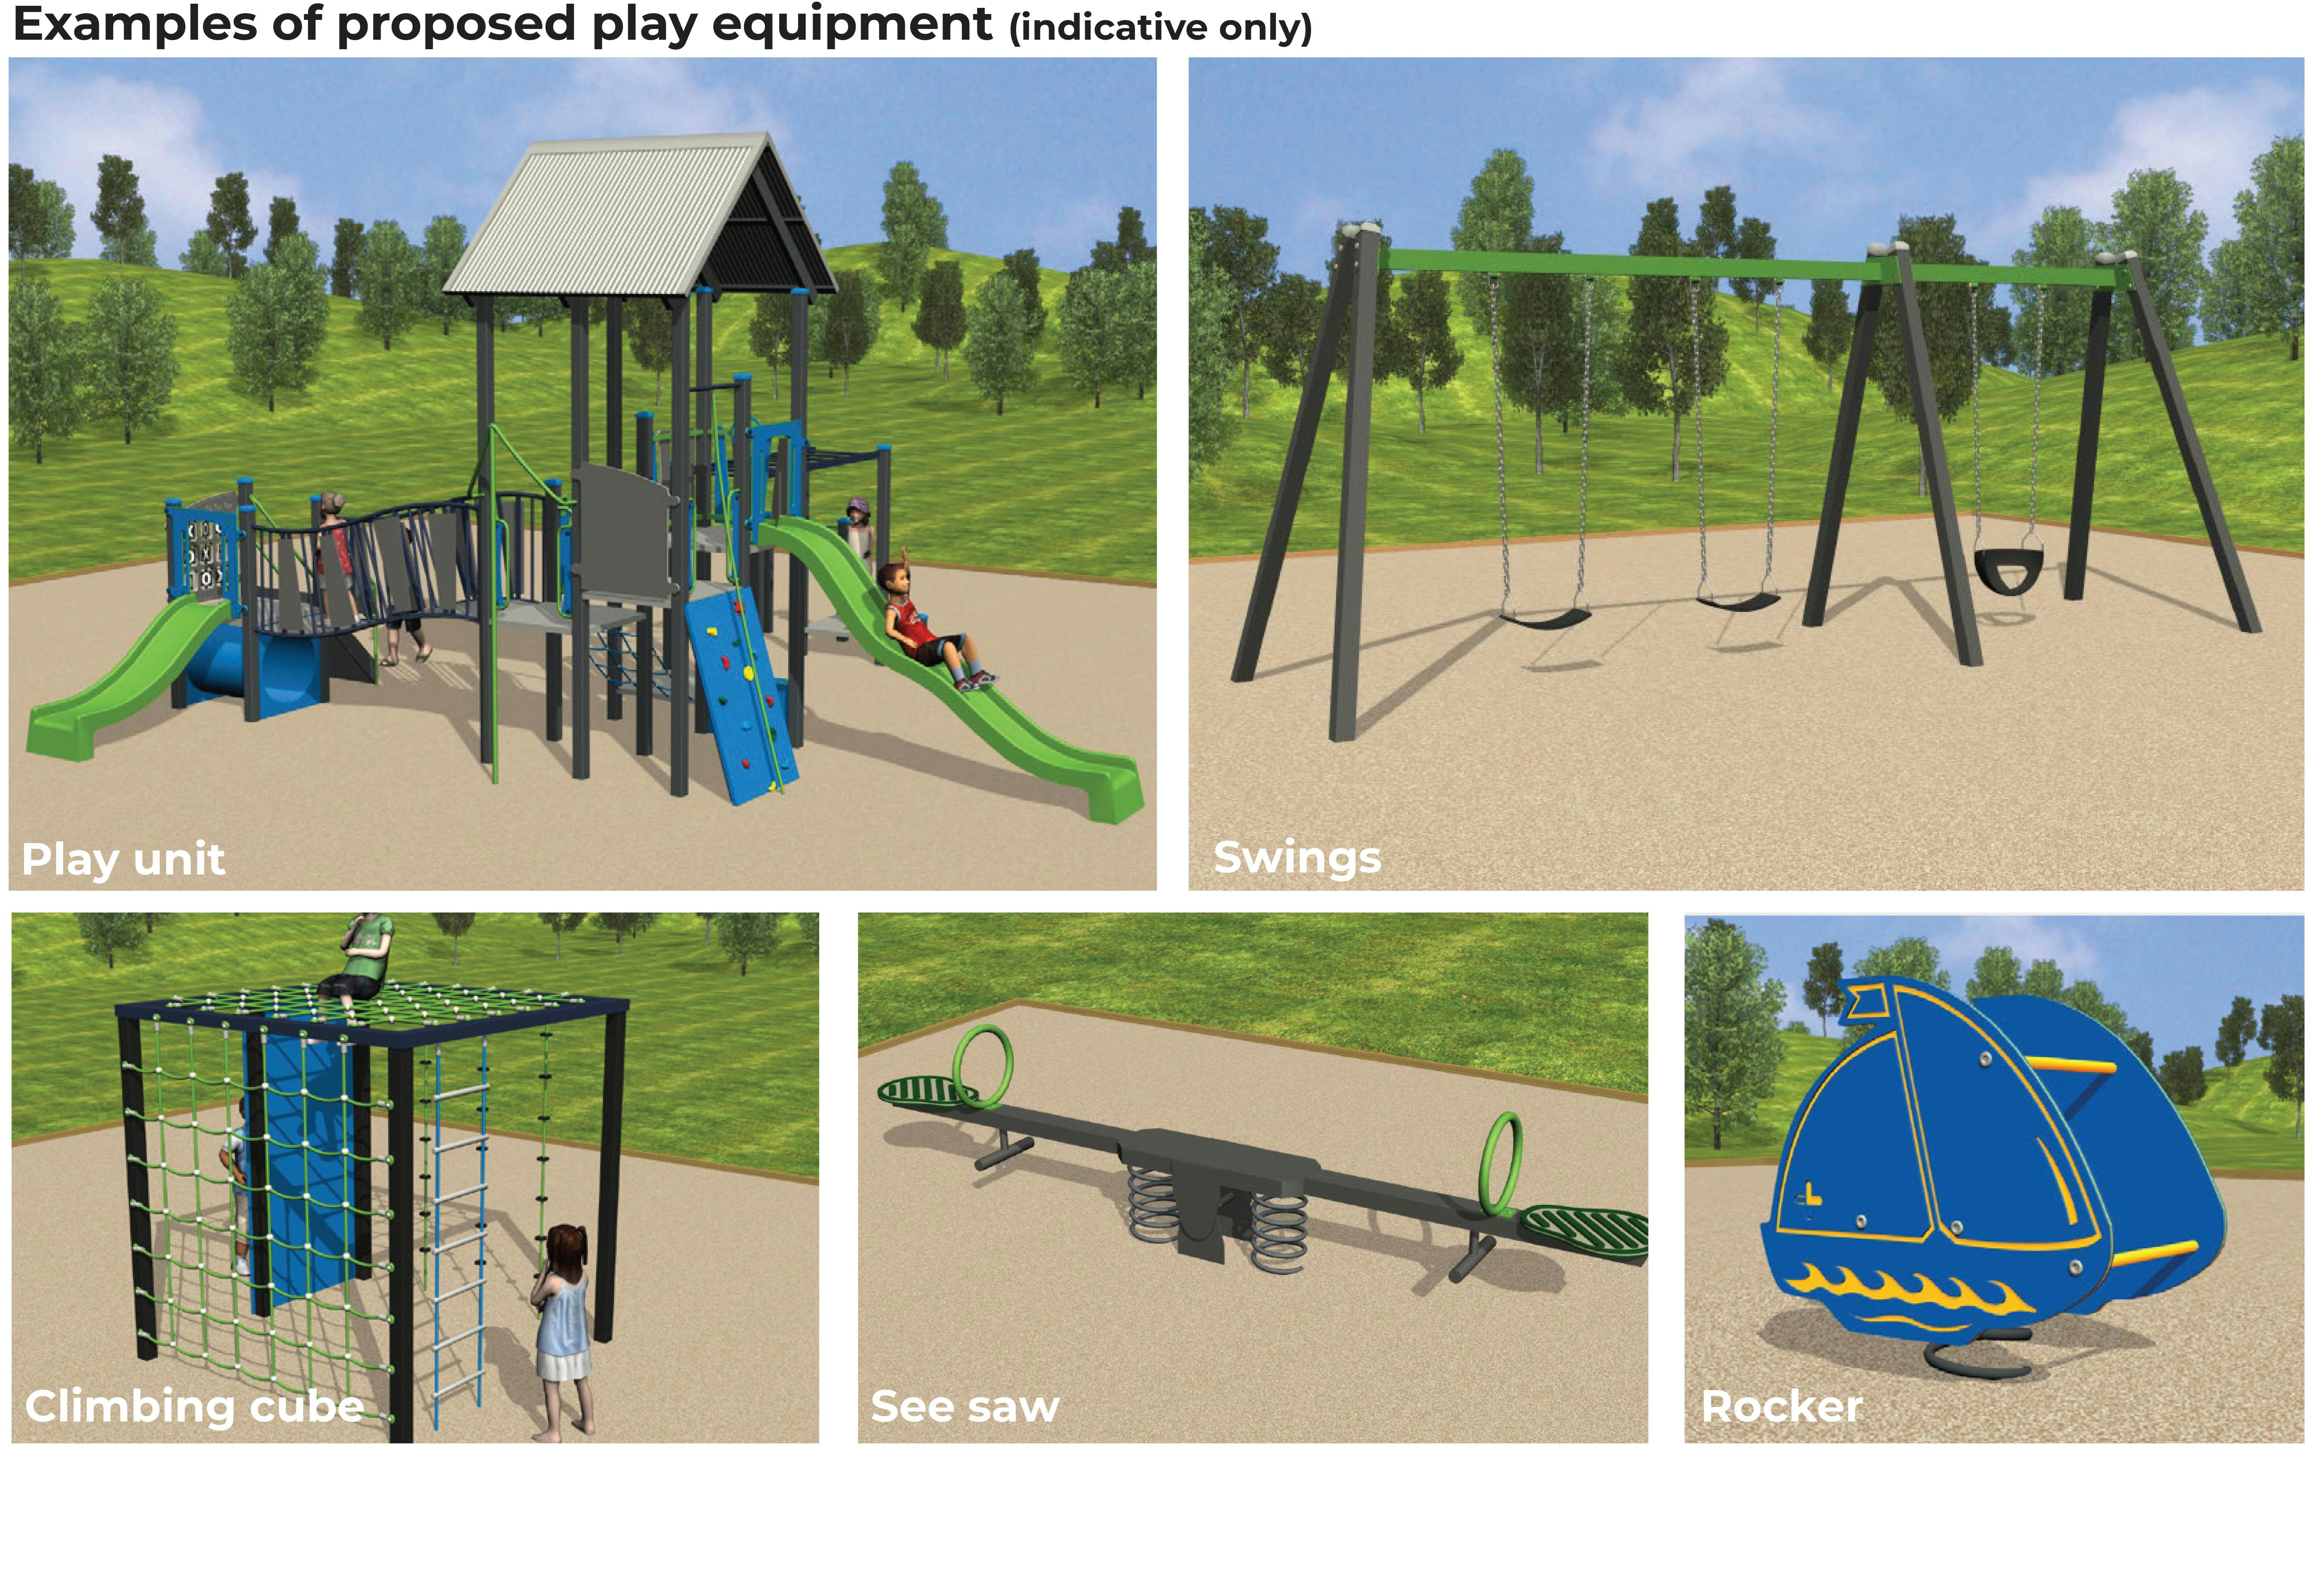 Hamilton Hume Reserve - Proposed Play Equipment